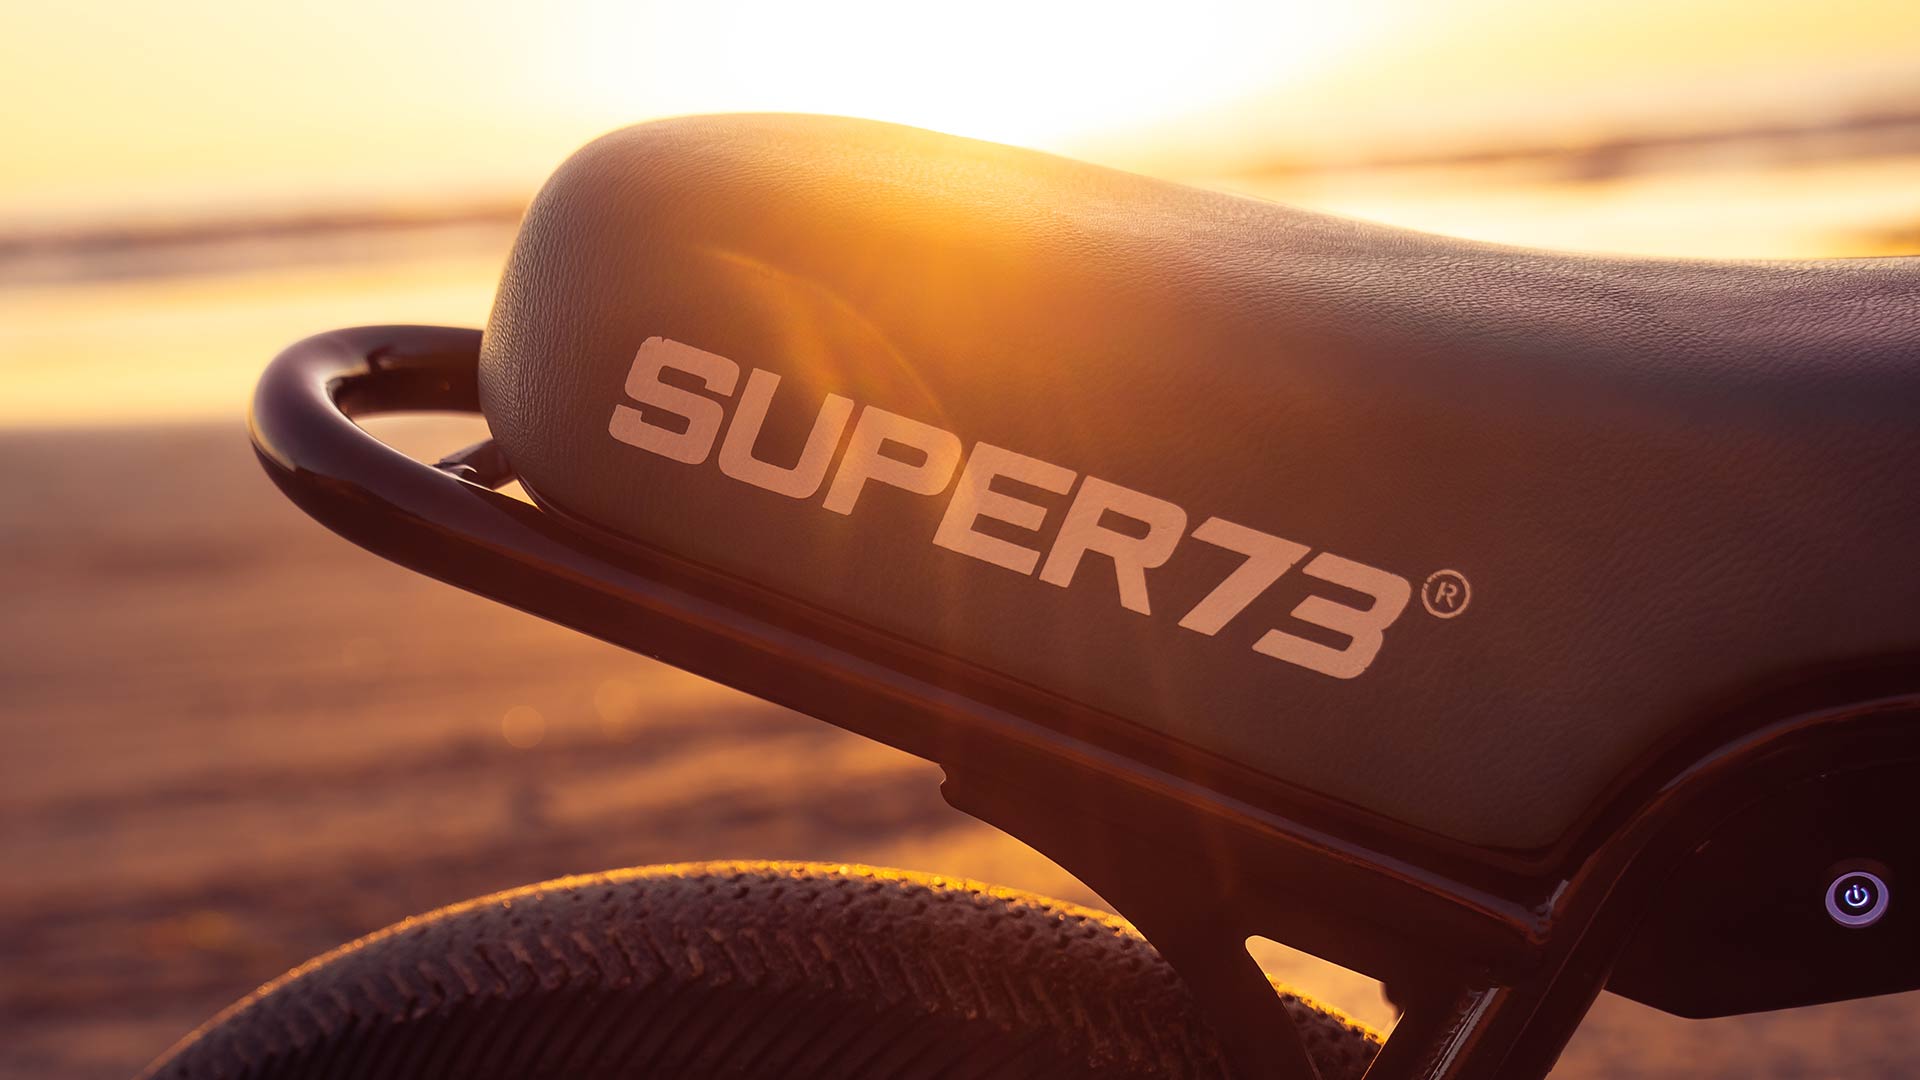 A SUPER73 seat gleaming in the sunset.